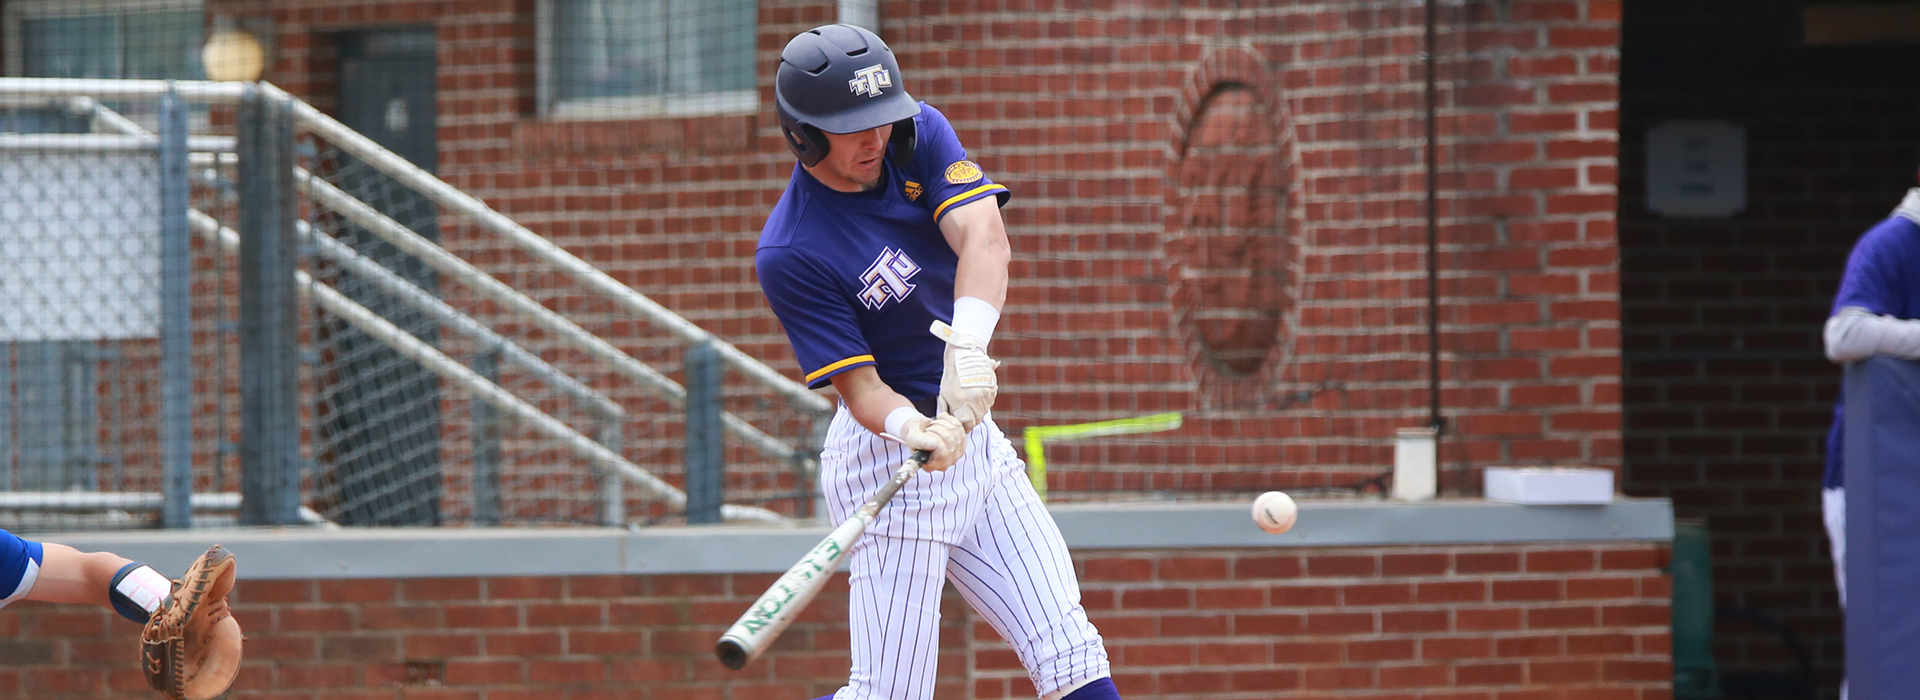 Johnson earns second OVC Player of the Week honor for 2021